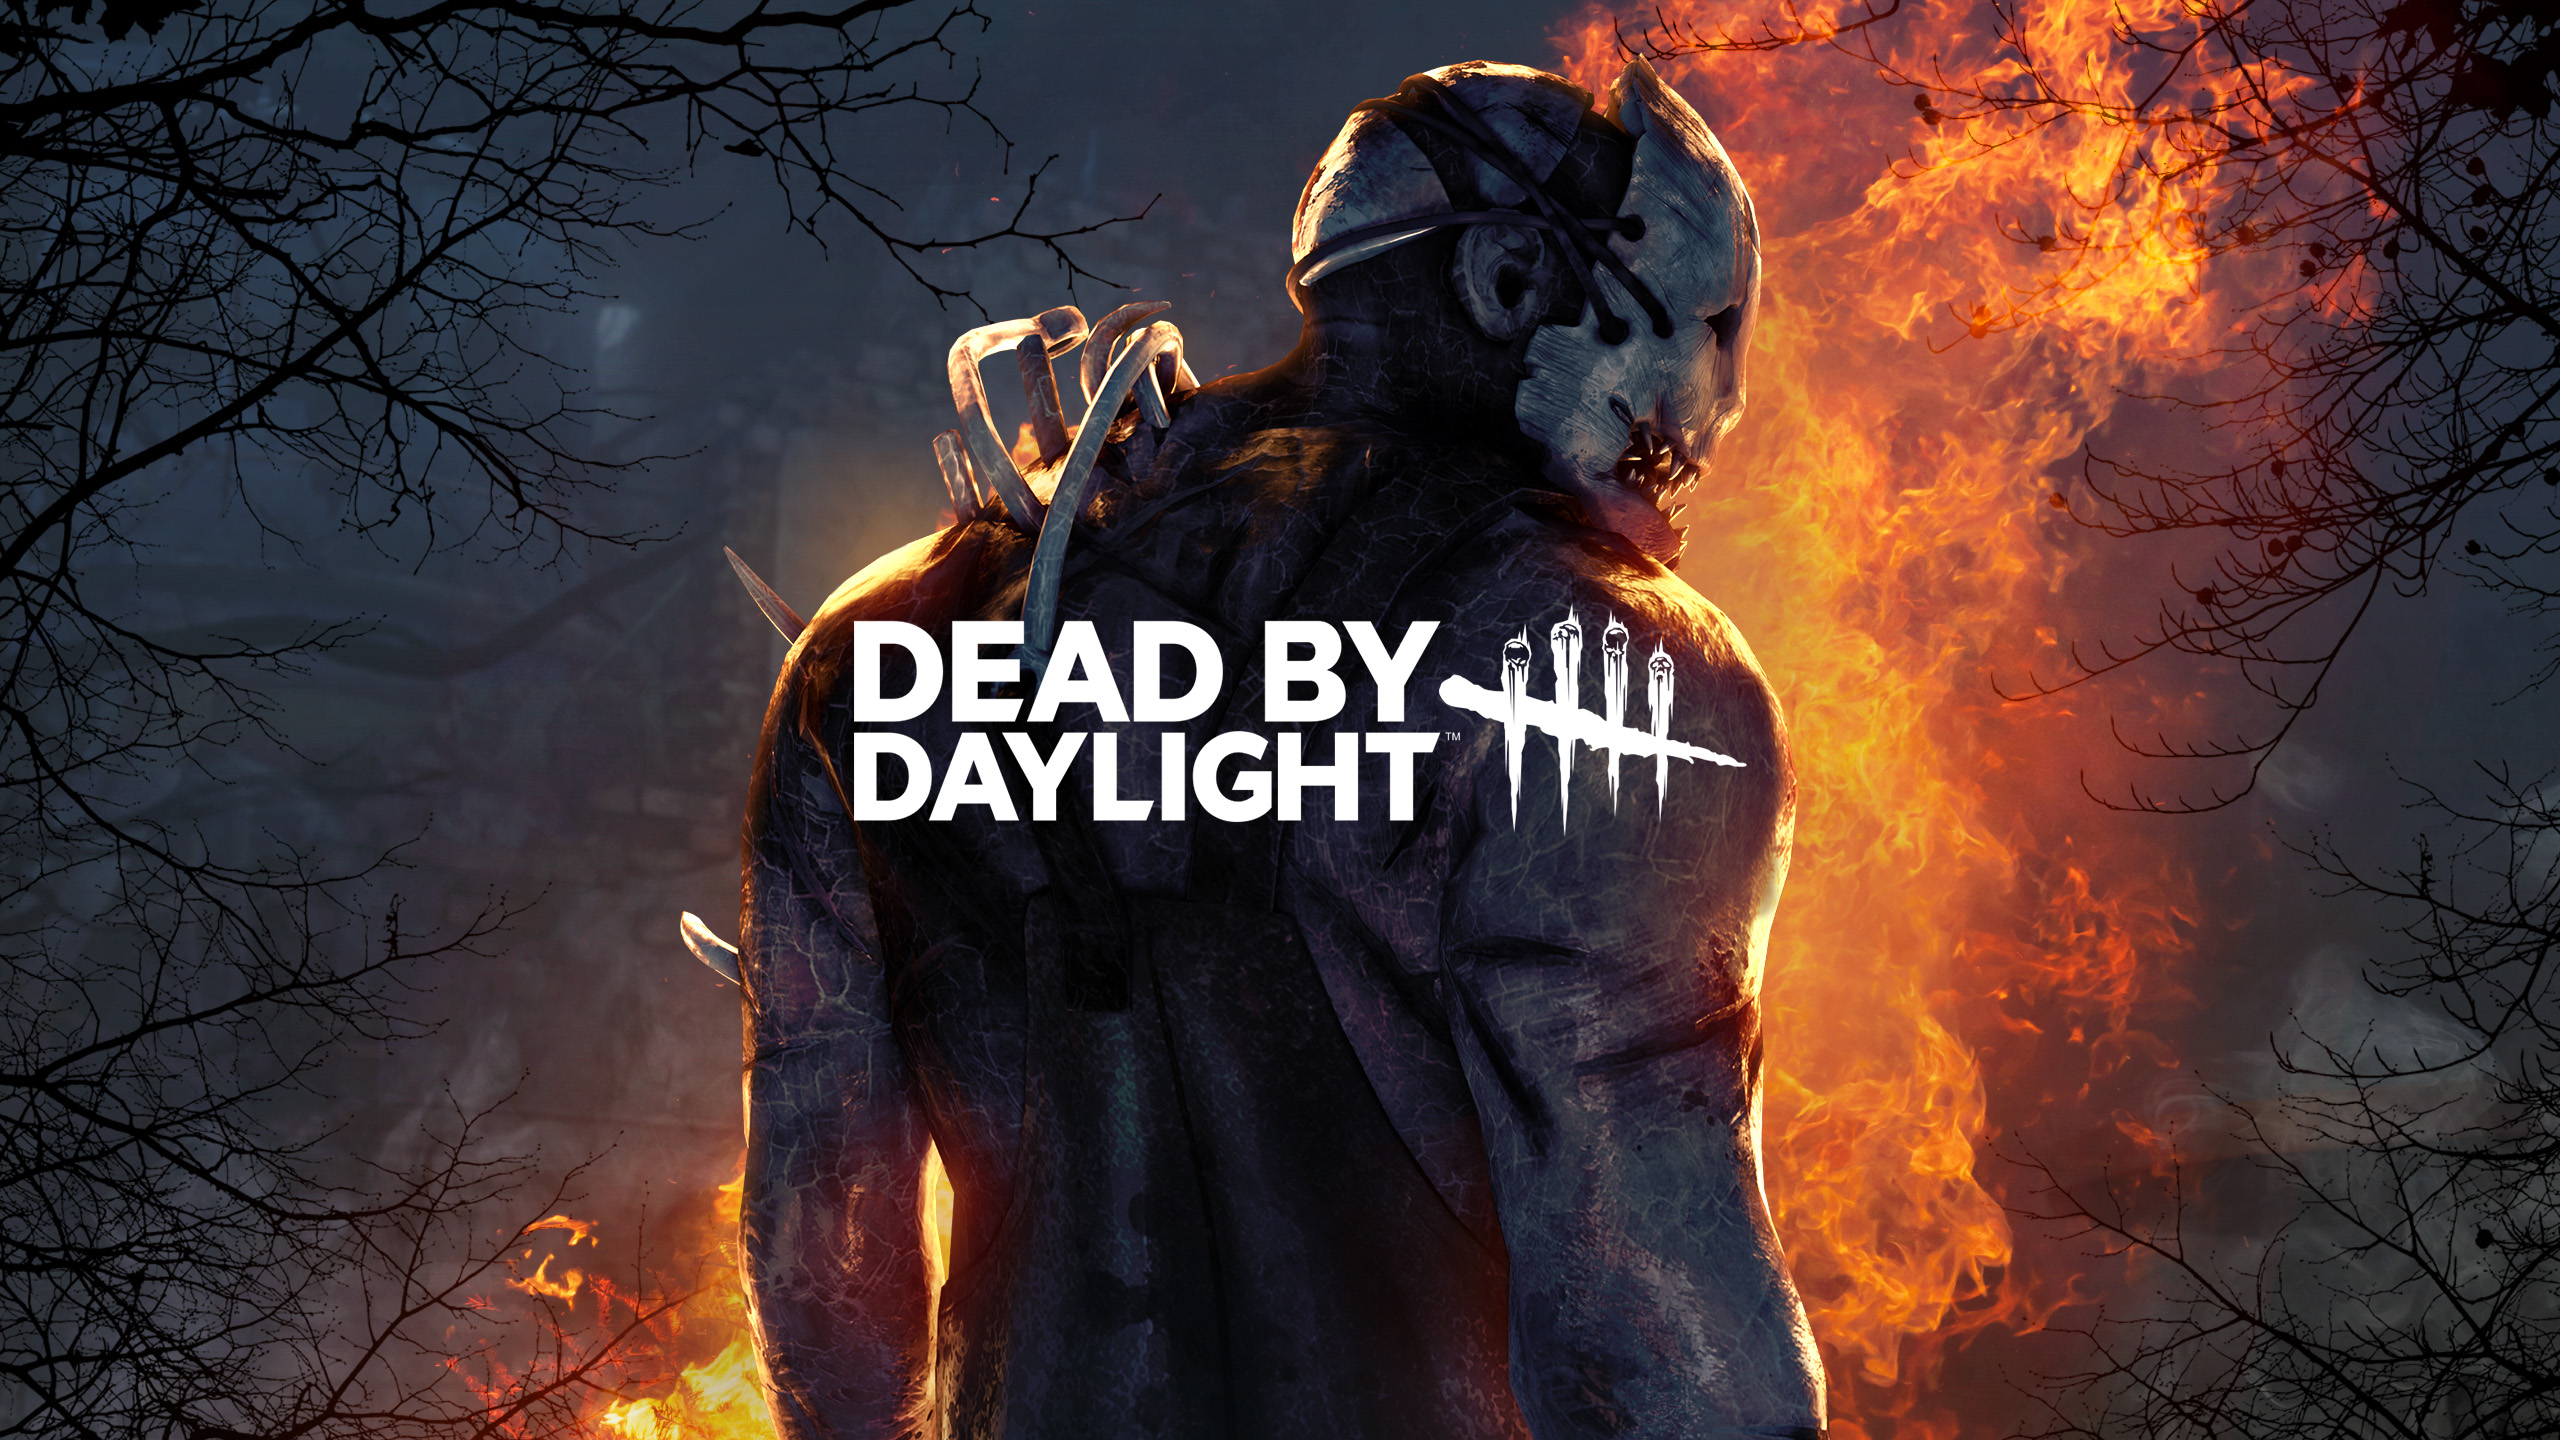 DEAD BY DAYLIGHT Full Version Mobile Game